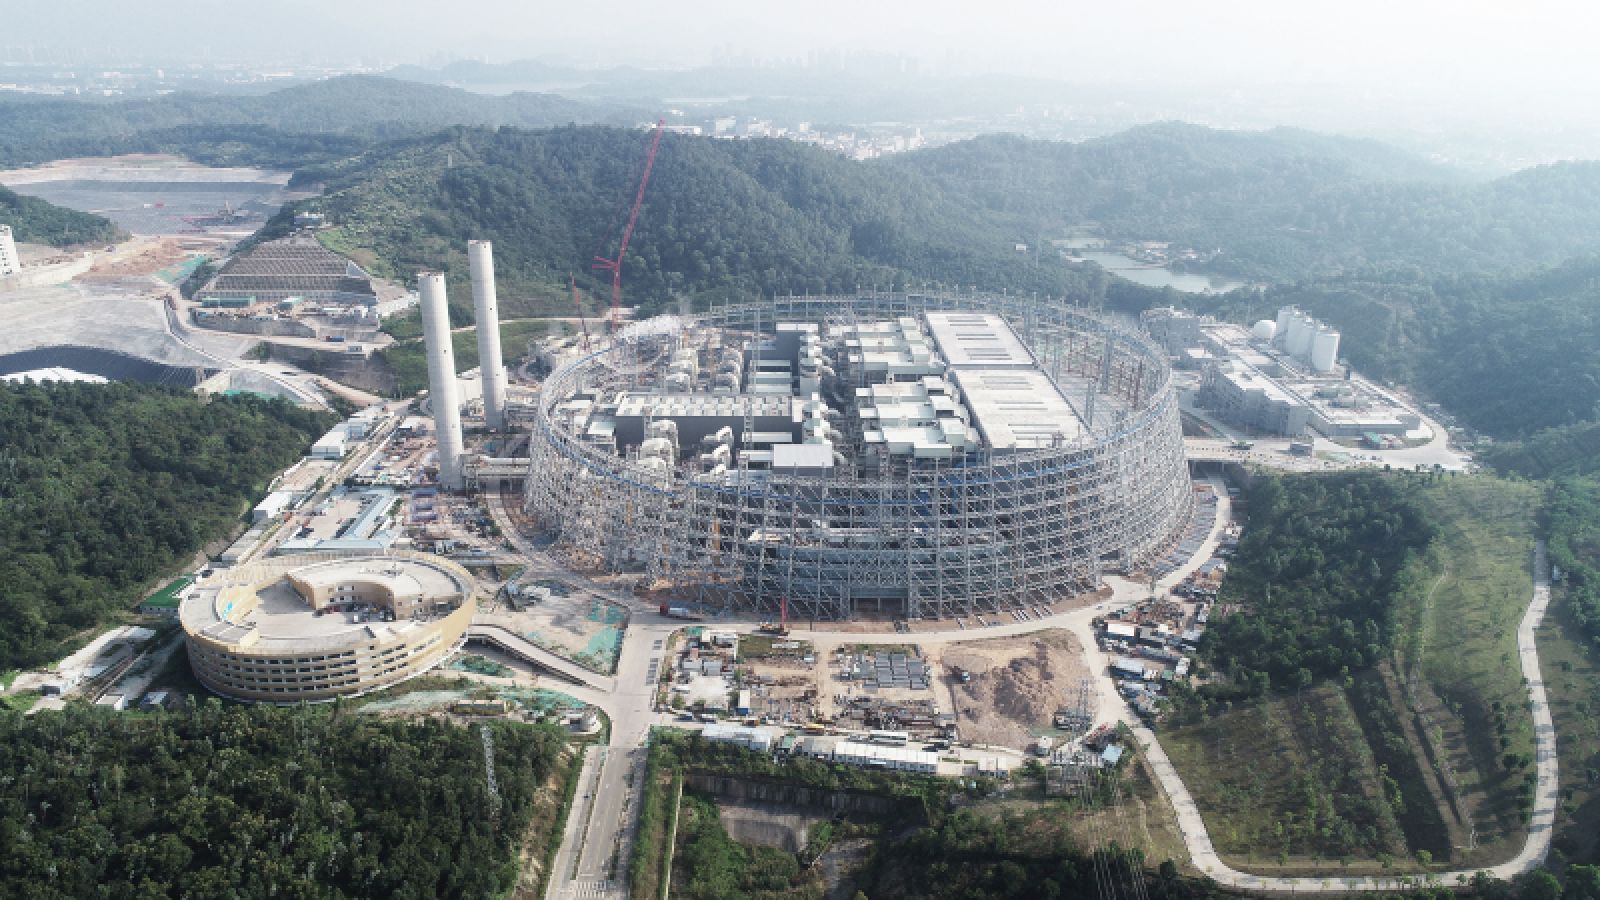 Shenzhen East Waste-to-Energy Power Plant